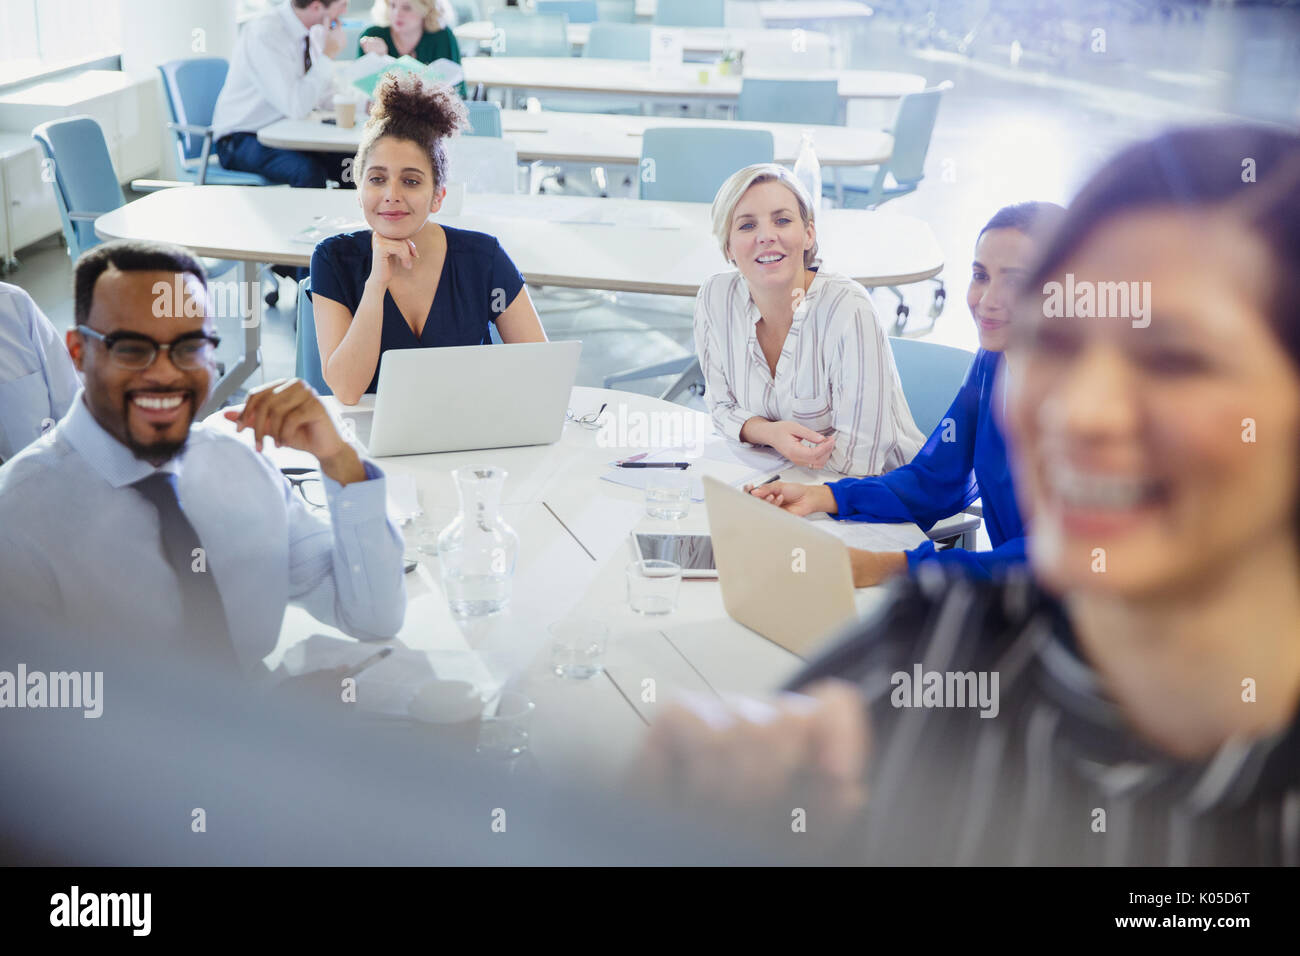 Business people with laptops listening in conference room meeting Stock Photo